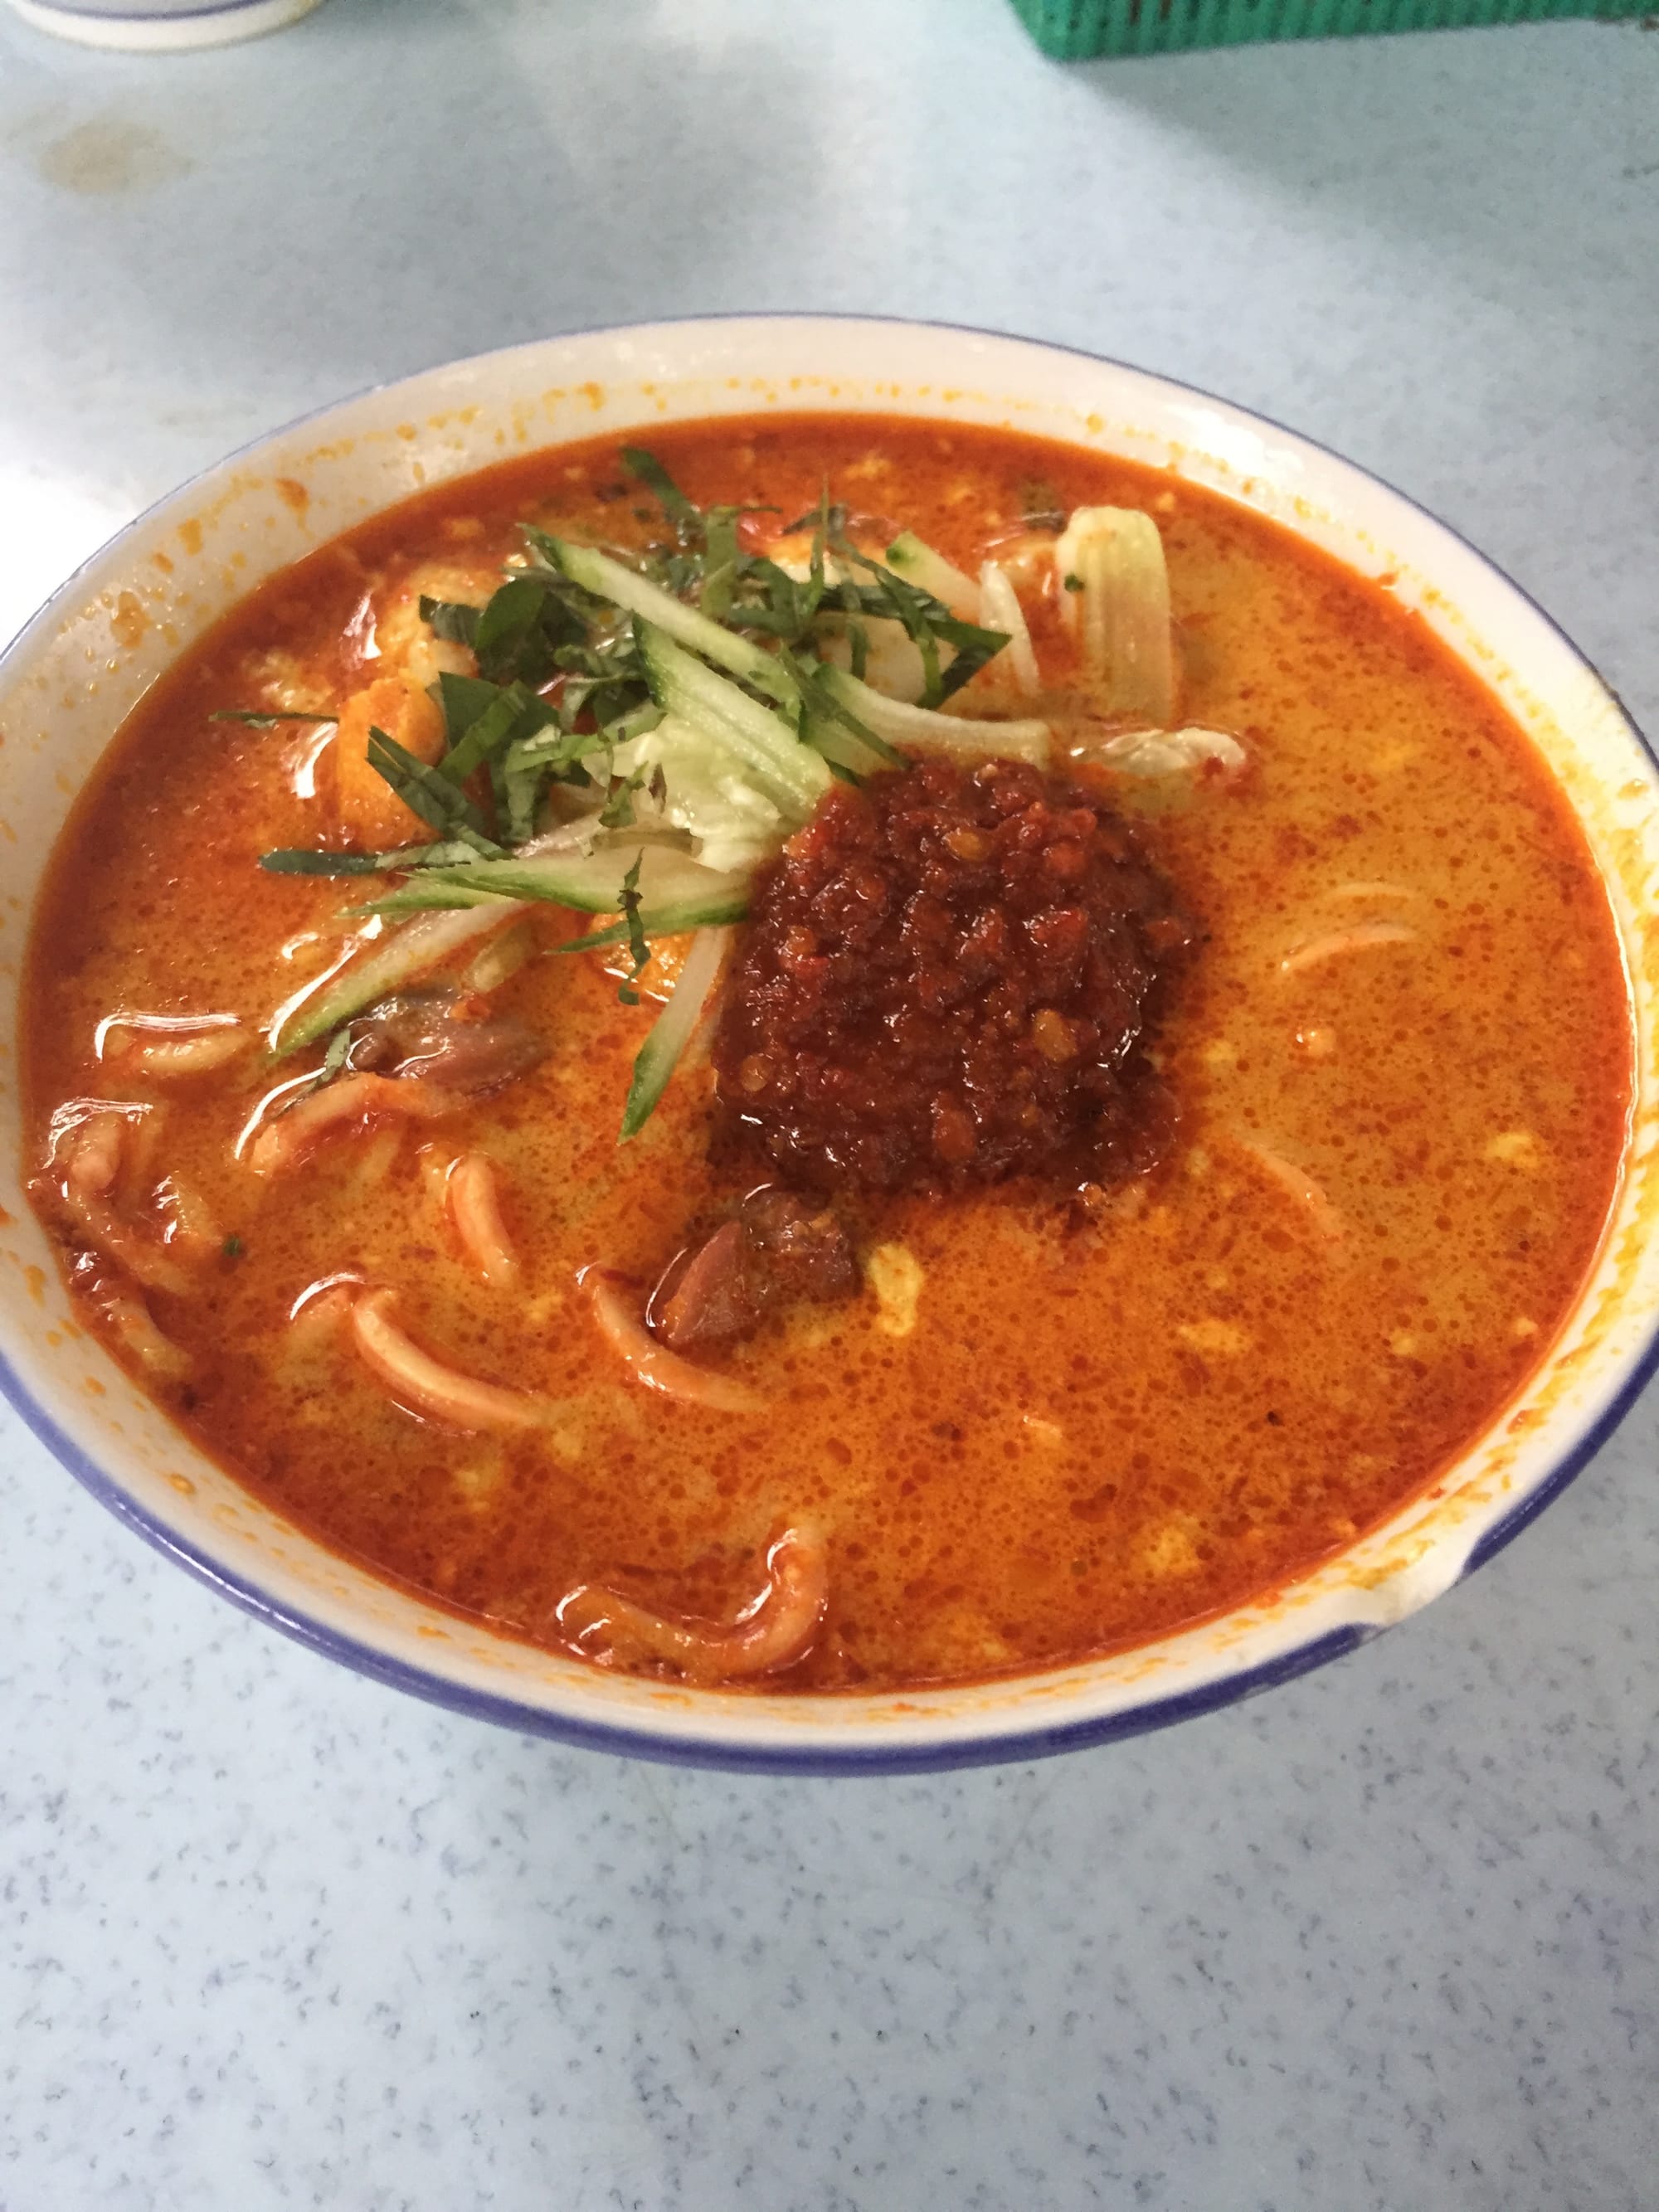 Photo by Author — Laksa at Baba Low’s, Malacca, Malaysia